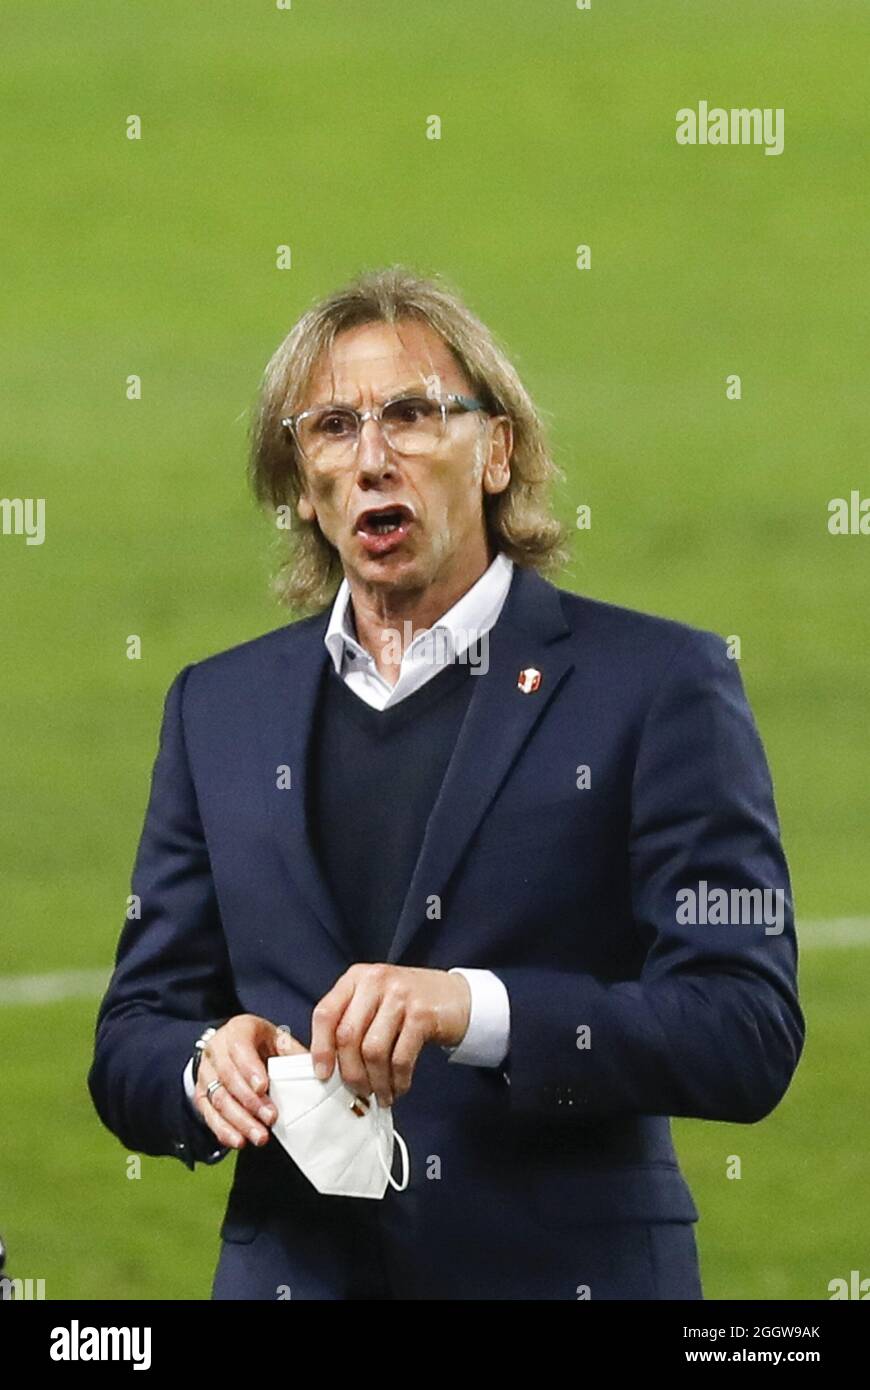 Lima, Peru. 02nd Sep, 2021. Head Coach of Peru, Ricardo Gareca during the 2022 Football World Cup Qualifier between Peru adn Uruguay at the Estádio Nacional del Peru in Lima, Peru. The game ended 1-1 with Tapia scoring for the hosts in the 24th minute and de Arrascaeta equalizing for Uruguay in the 29th. Credit: SPP Sport Press Photo. /Alamy Live News Stock Photo